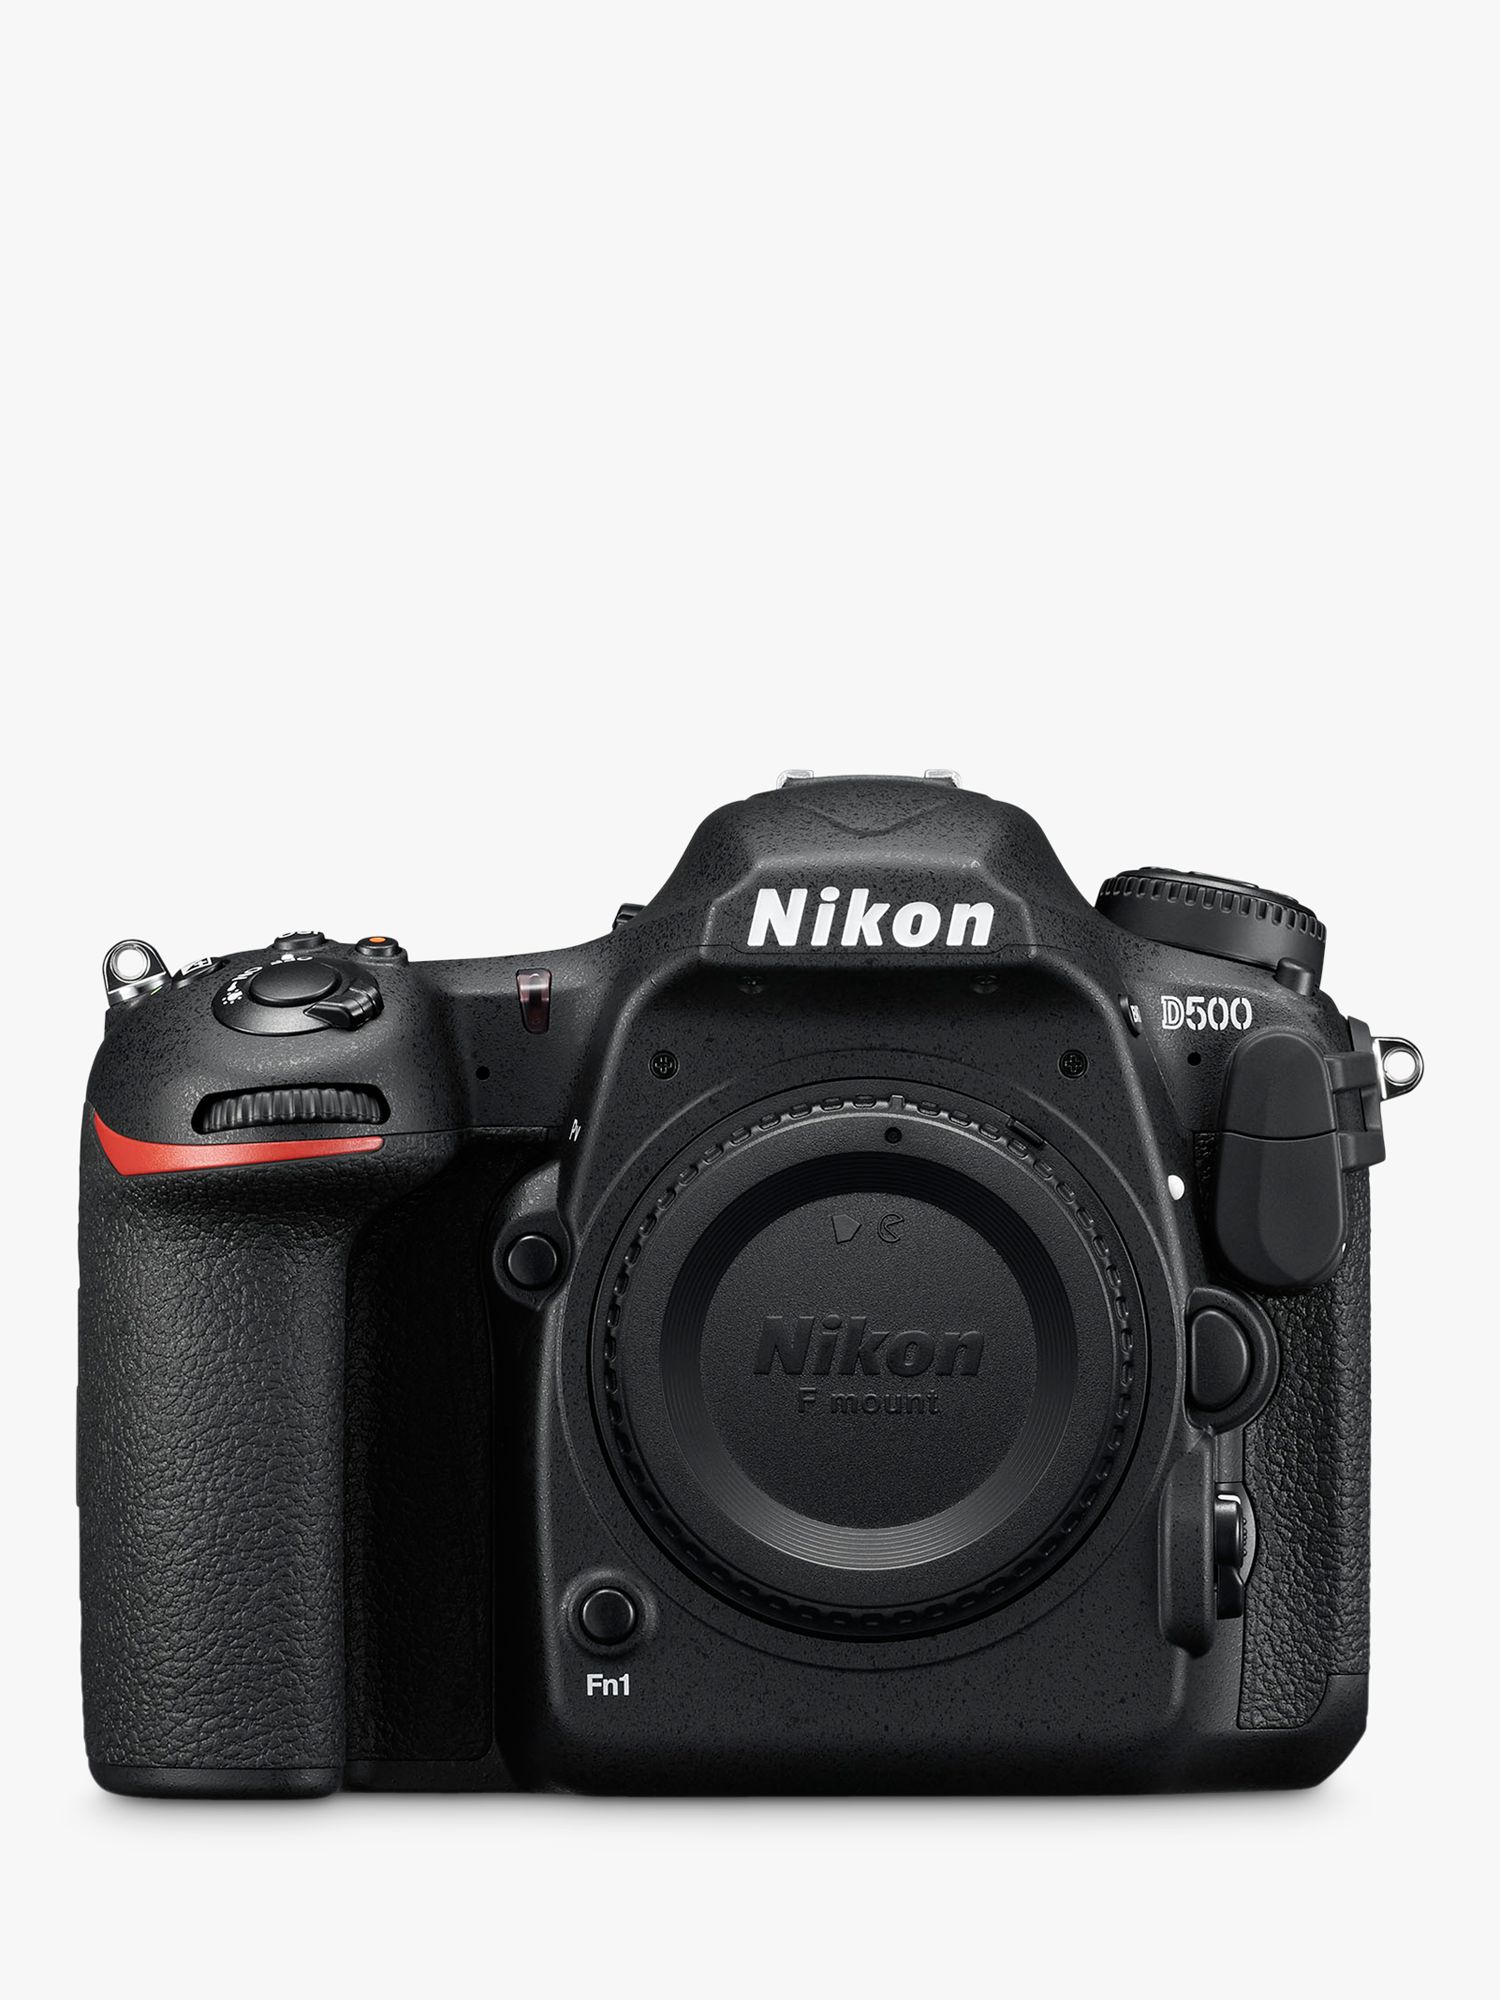 Nikon DX D500 Digital SLR Camera, 4K Ultra HD, 20.9MP, Wi-Fi/Bluetooth/NFC With 3.2 Tiltable Touch Screen, Black, Body Only